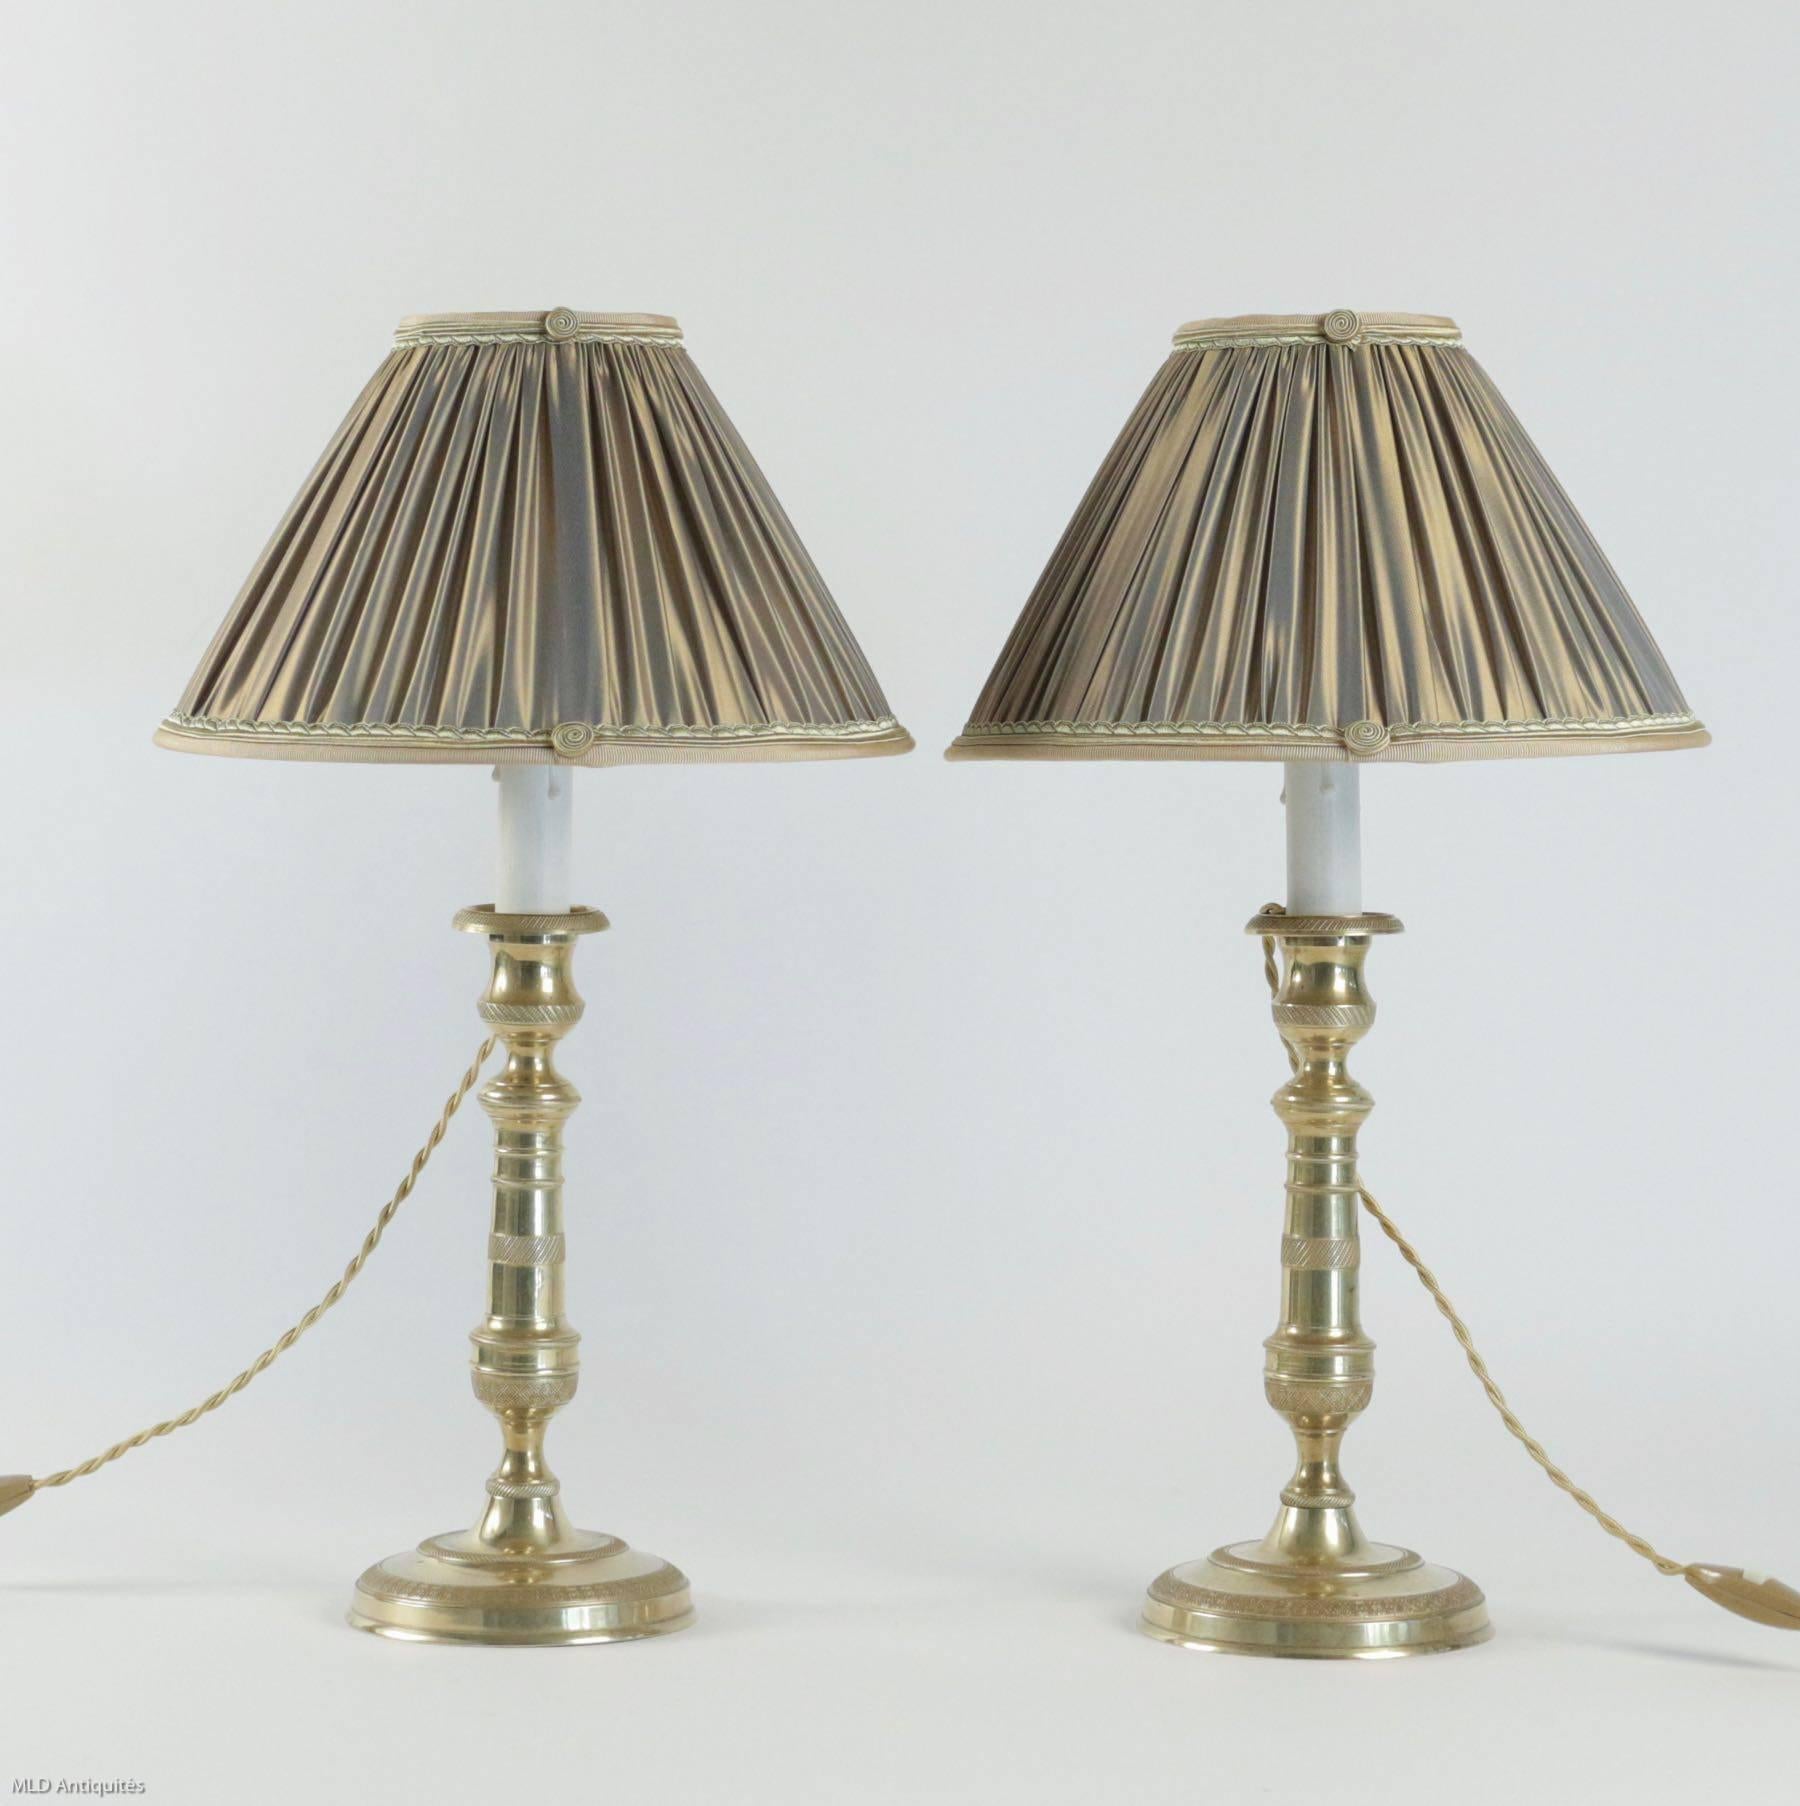 Pair of nicely-chased French Louis XVI Period, original gilt bronze candlesticks, very finely chiselled, converted to table lamps, with new French pleated cream color silk lamp shades.
French work late-18th century, Louis XVI period, circa